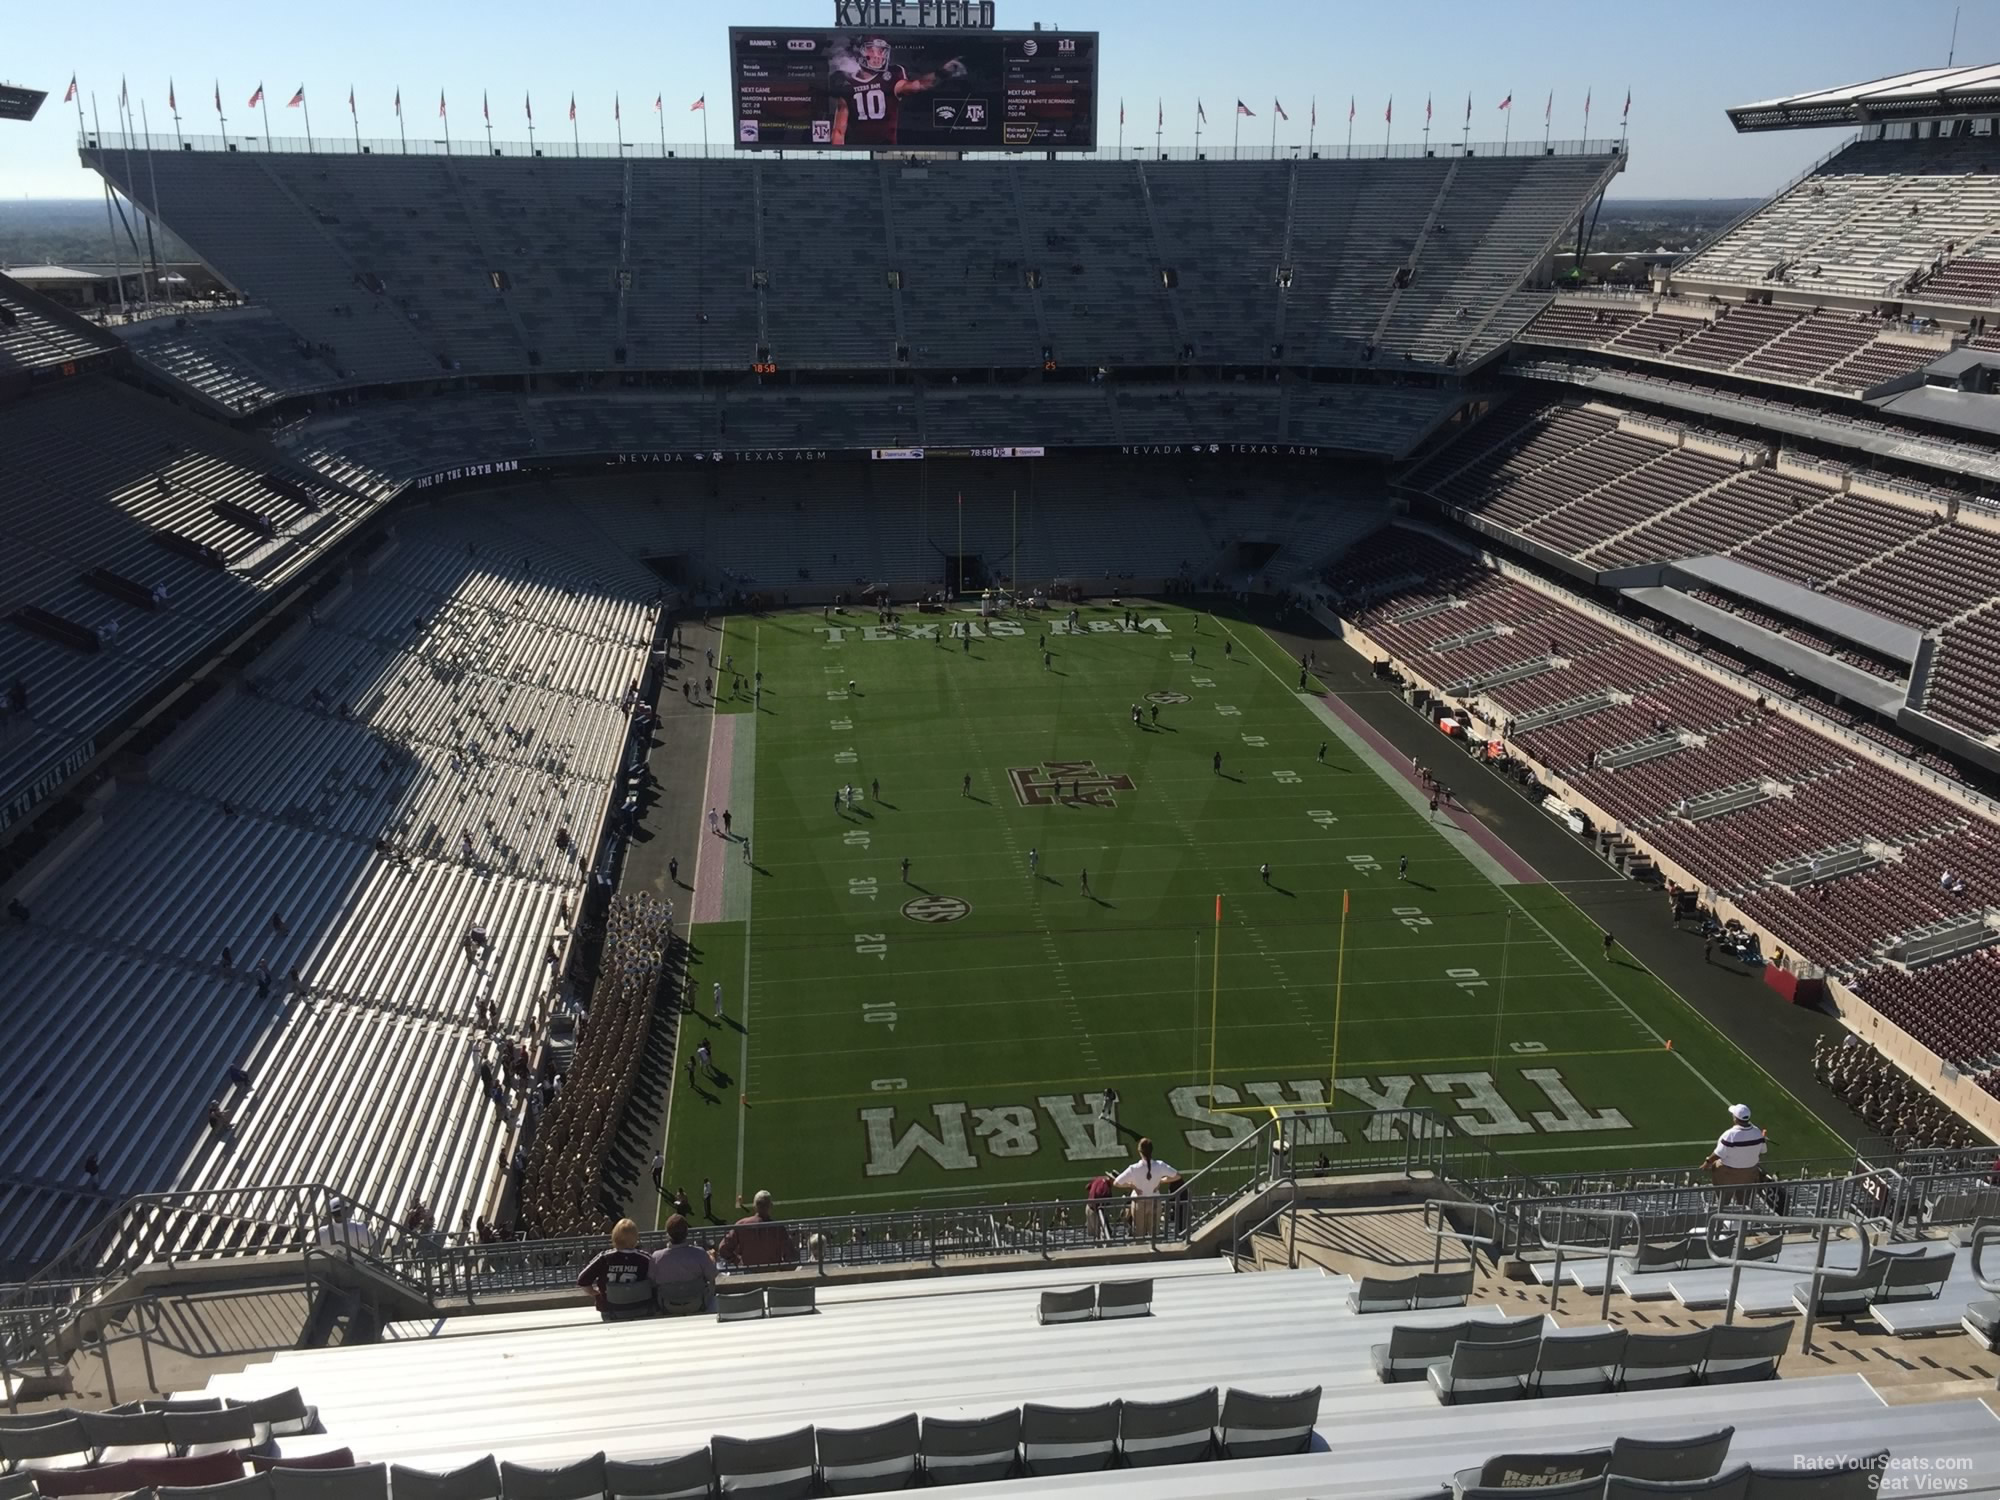 section 417, row 20 seat view  - kyle field